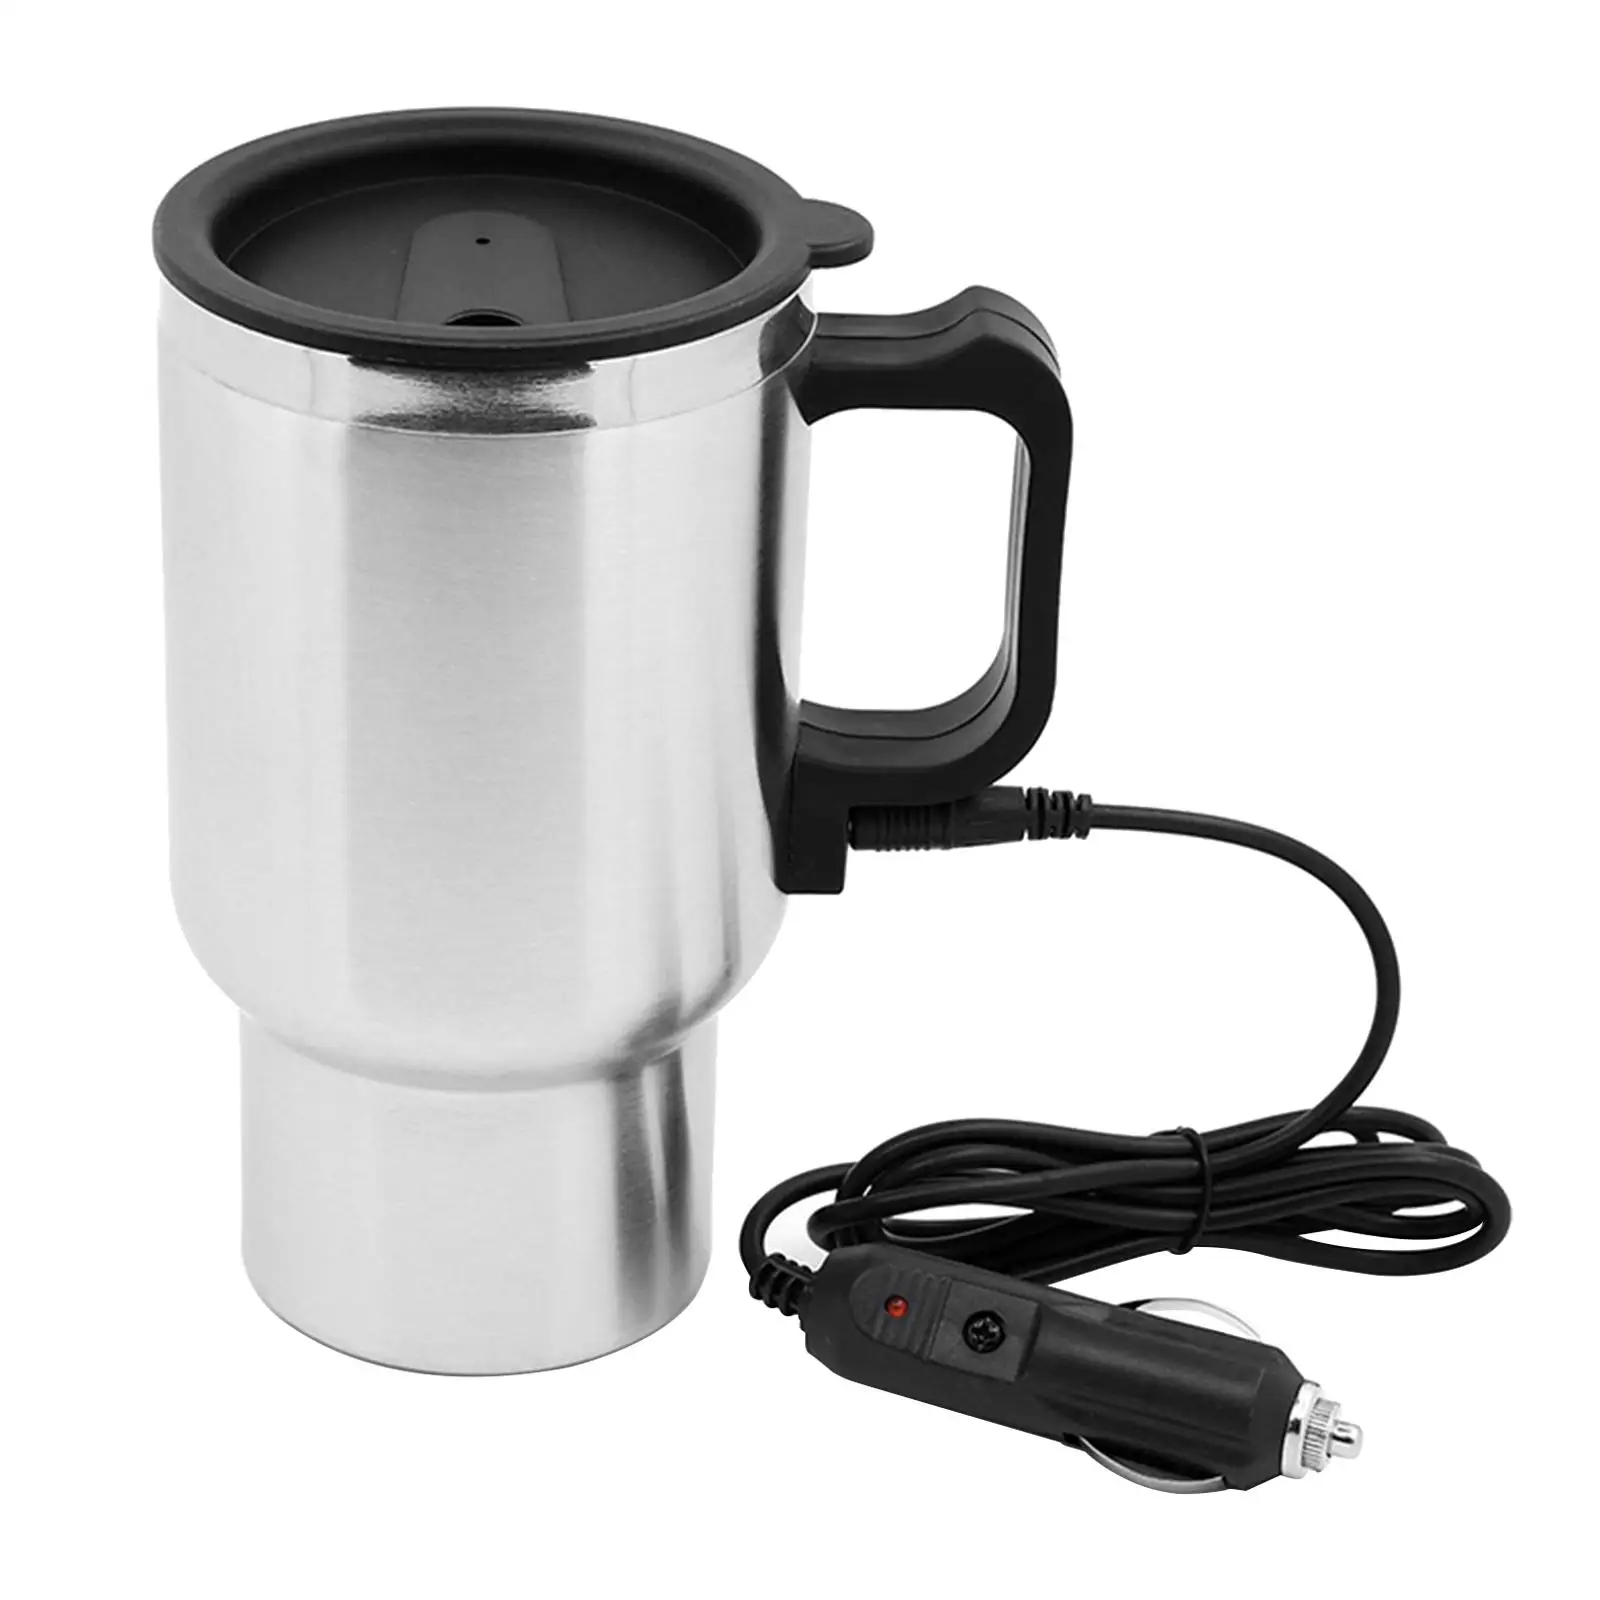 12V Car Heating Cup 500ml, Stainless Steel Insulated Heated Mug Car Kettle Heater for Tea Coffee Milk Heating Water